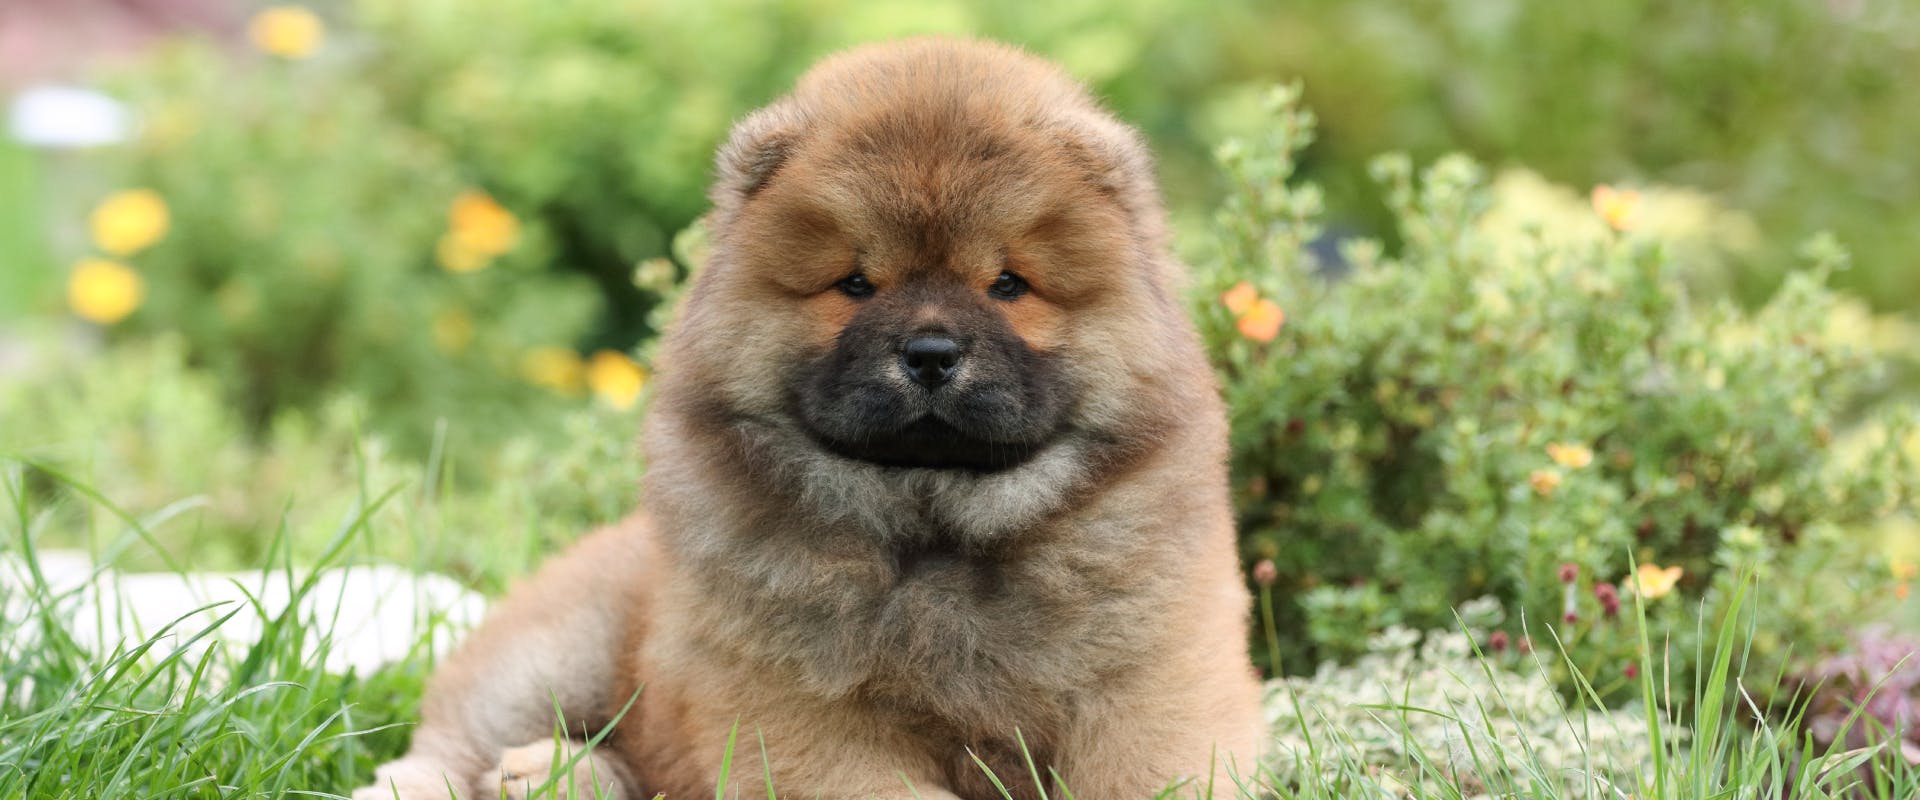 a chow chow puppy sat on a grassy lawn surrounded by wild flowers